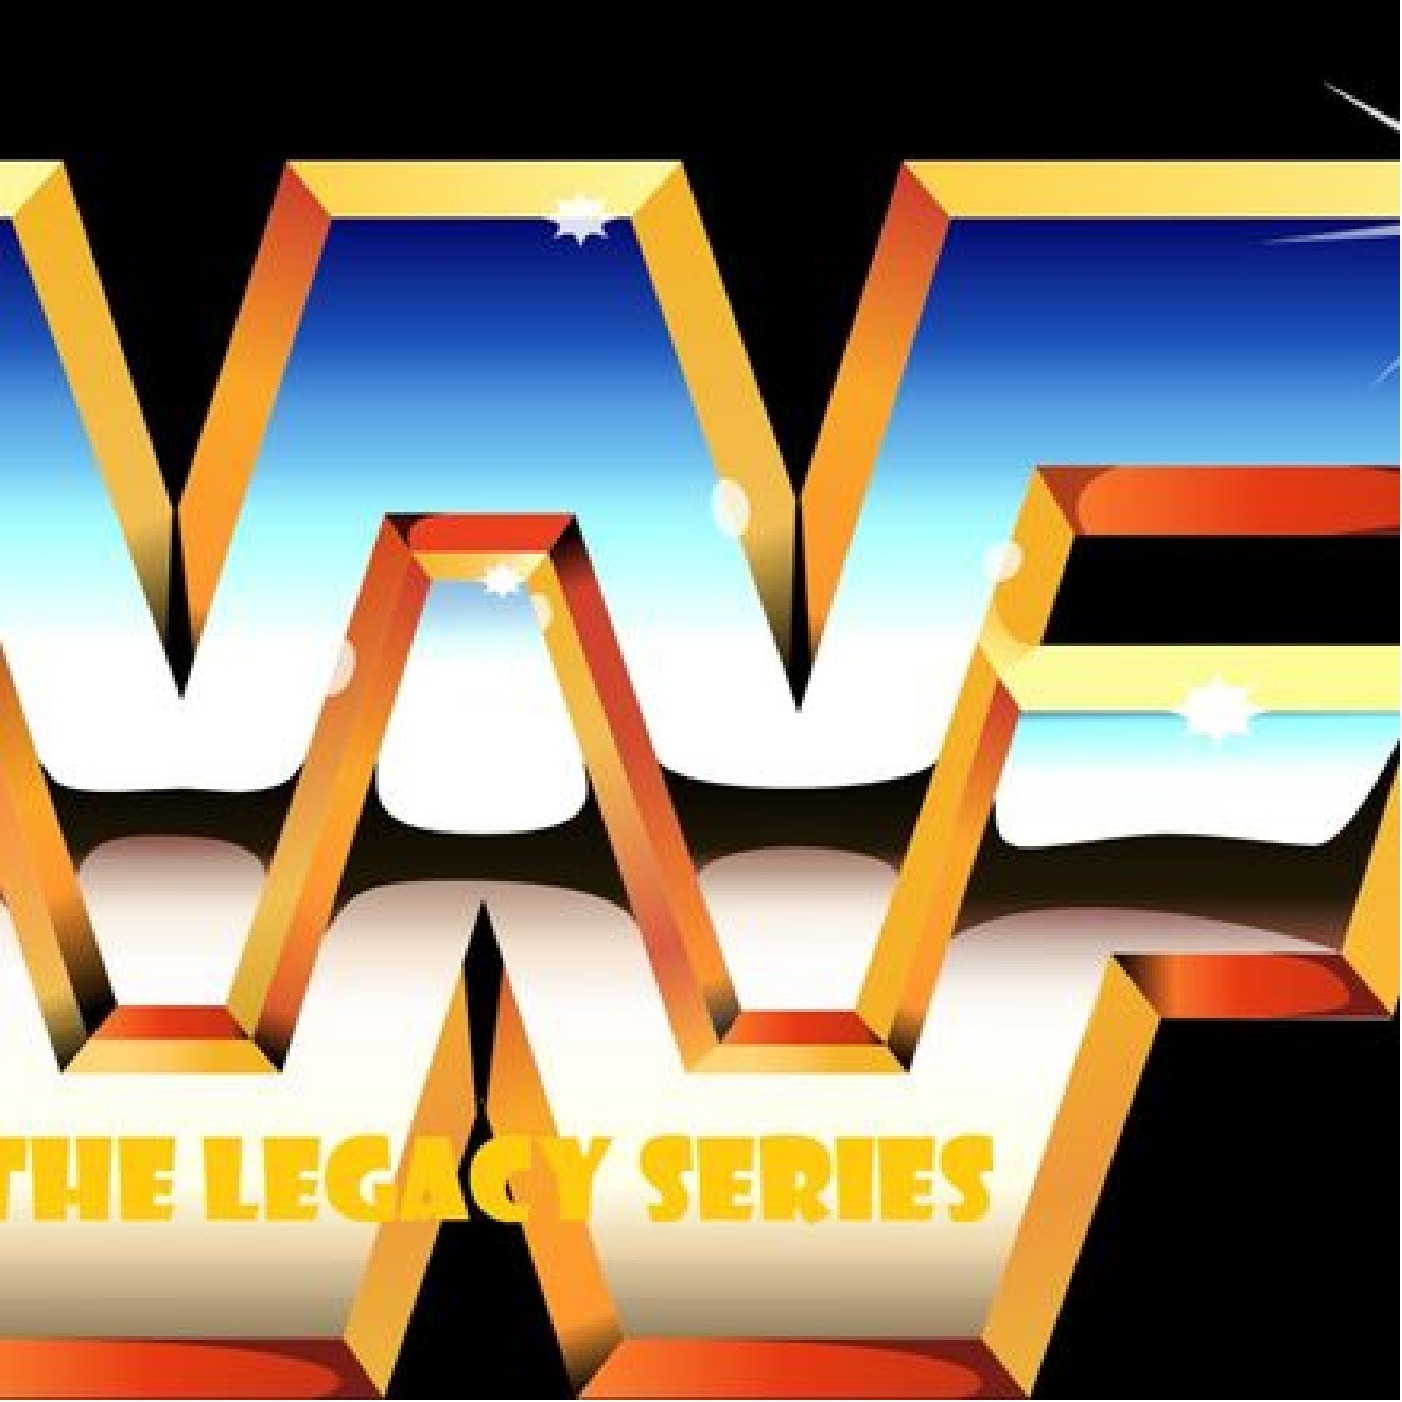 WWF: The Legacy Series - The Snake, The Deadman, and the Summer of ’91